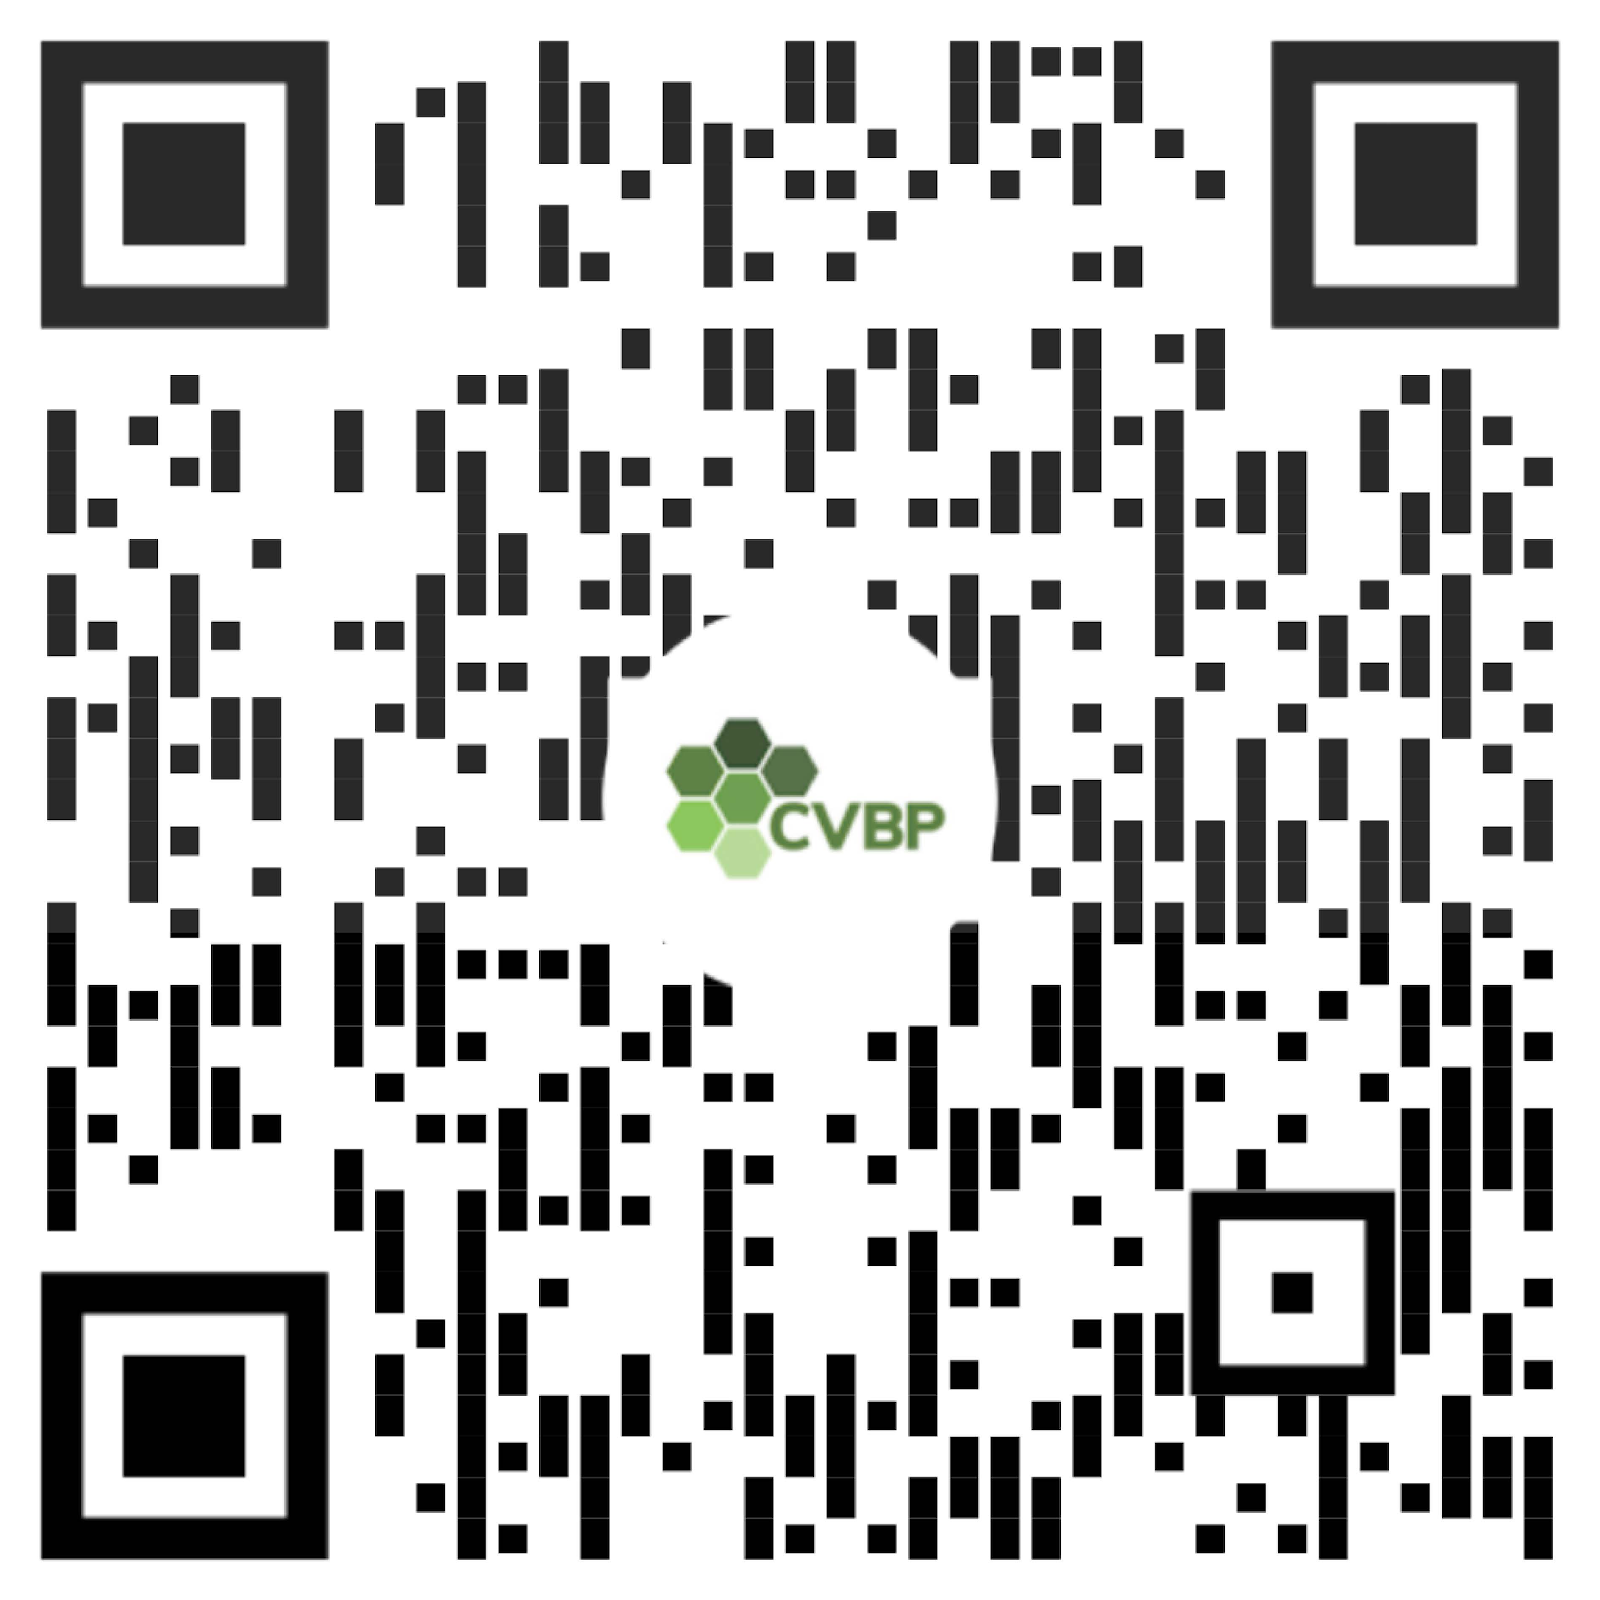 A qr code with a green logo

Description automatically generated